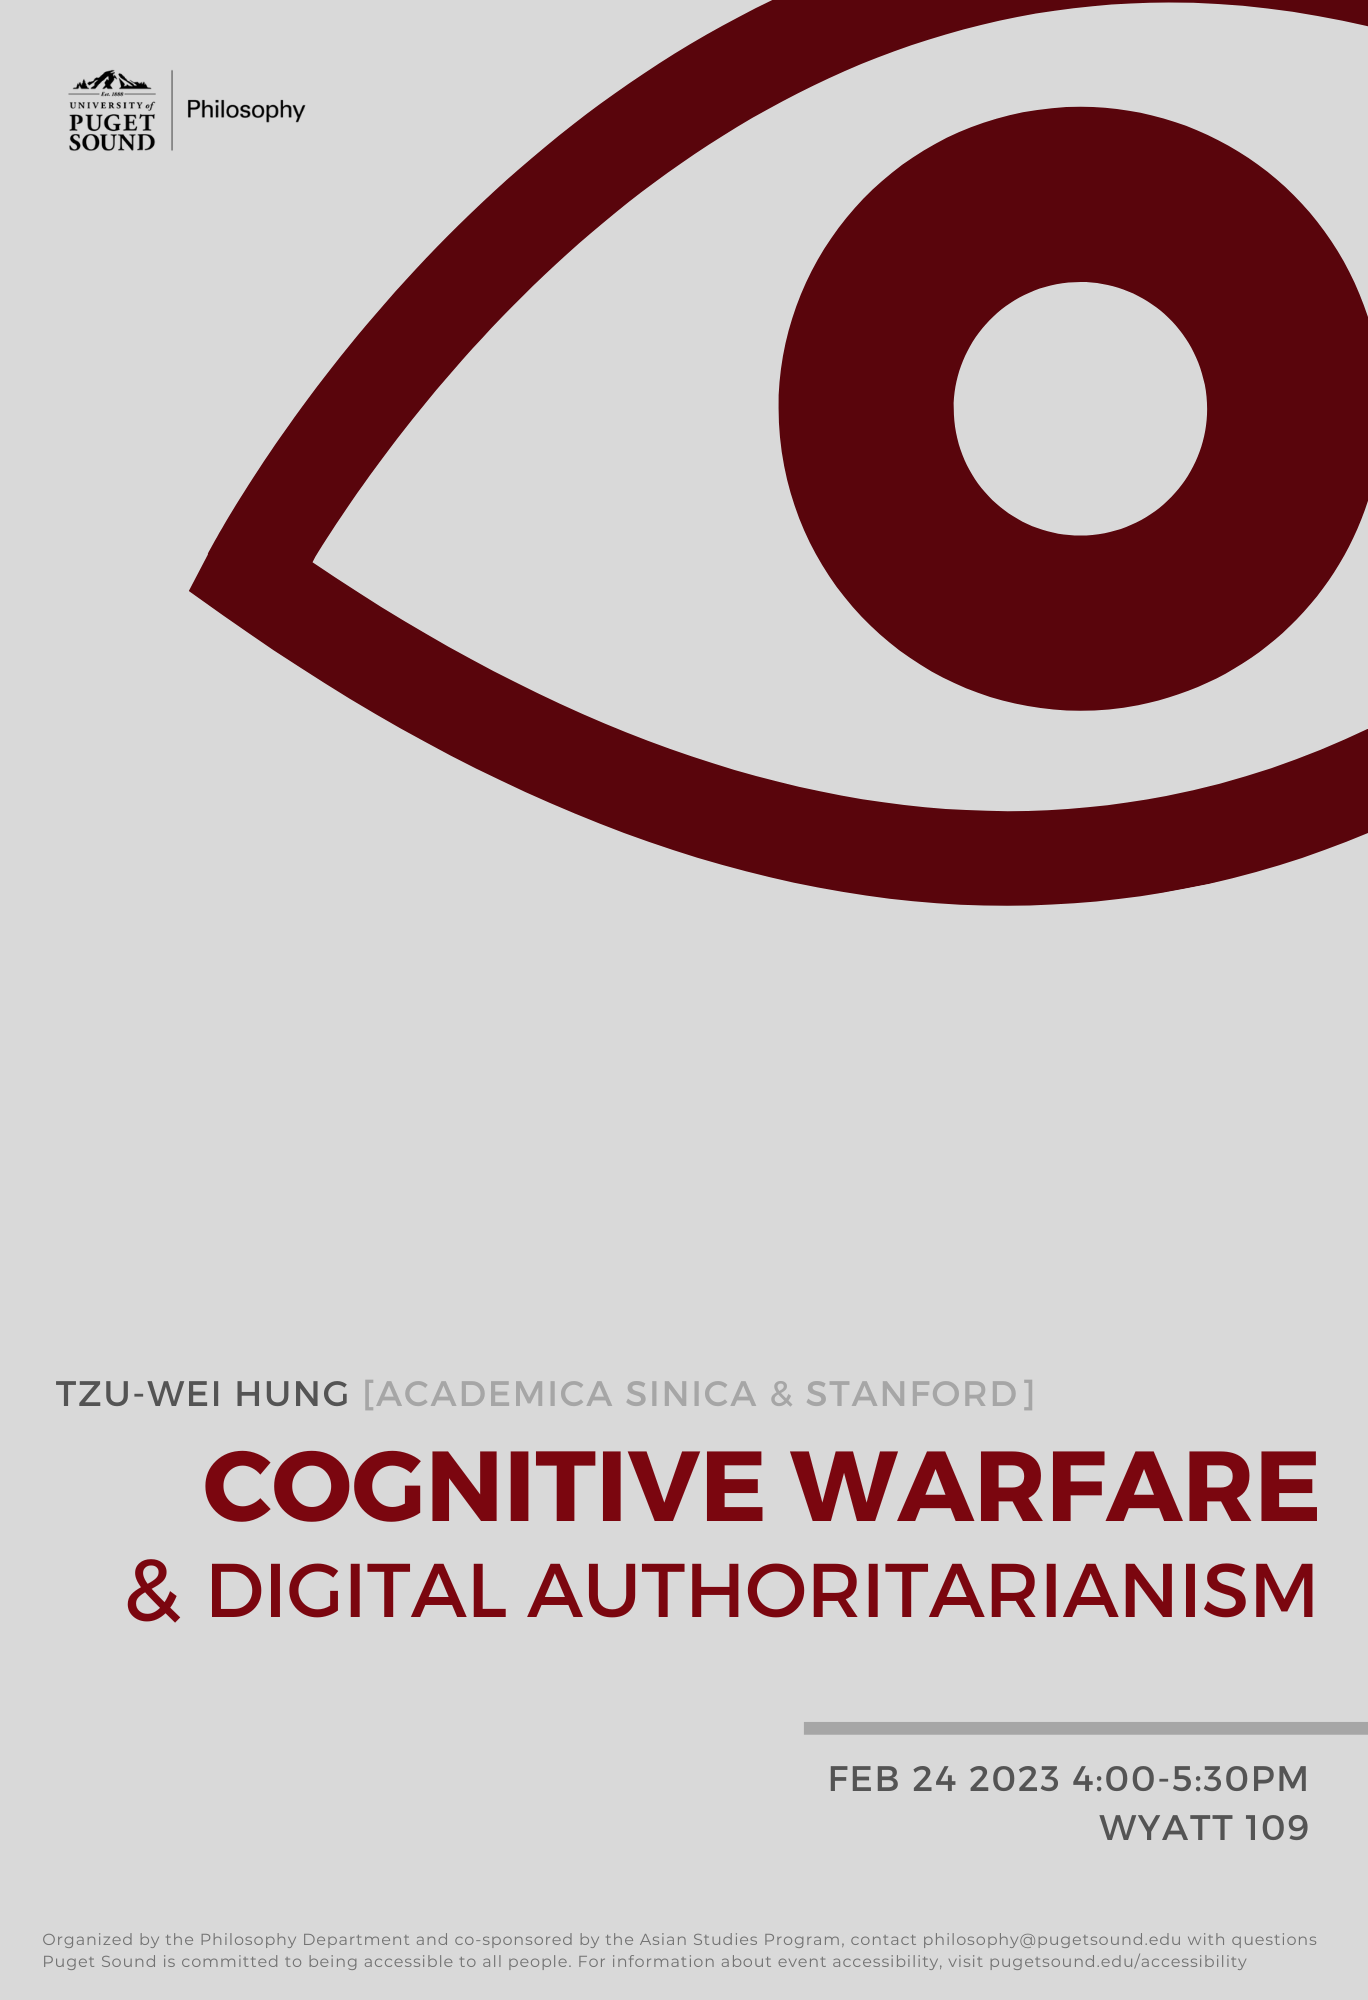 Cognitive Warfare and Digital Authoritarianism event